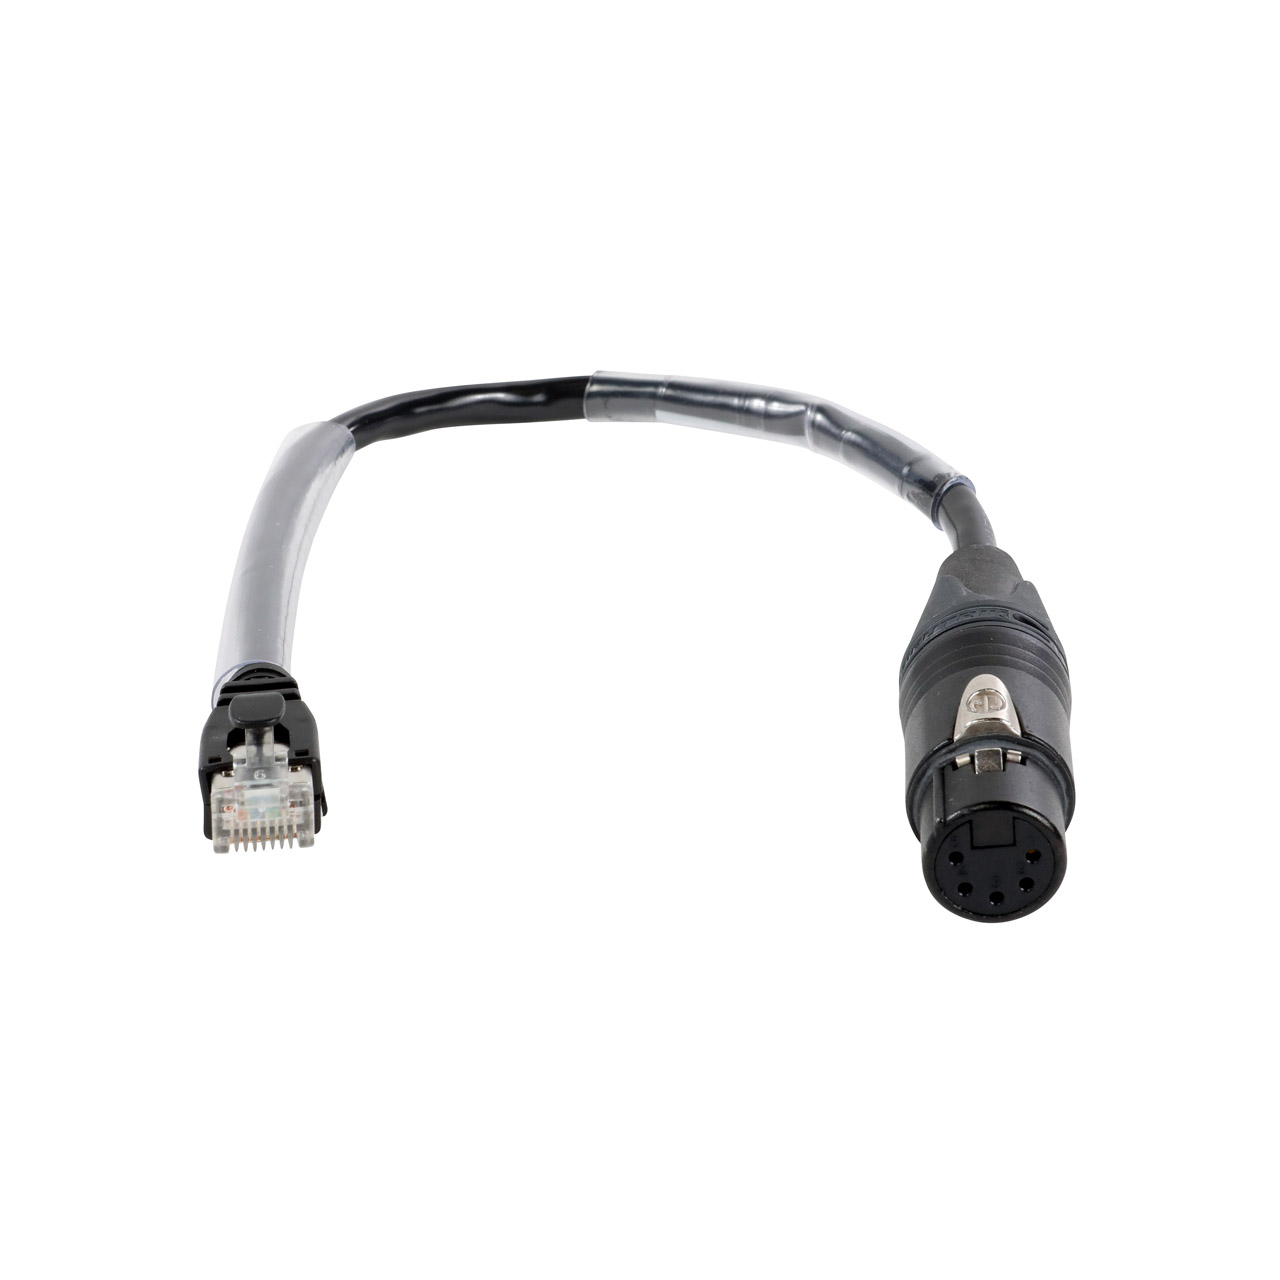 DMX 5-Pin Female (Connector) XLR to Ethernet Adapter